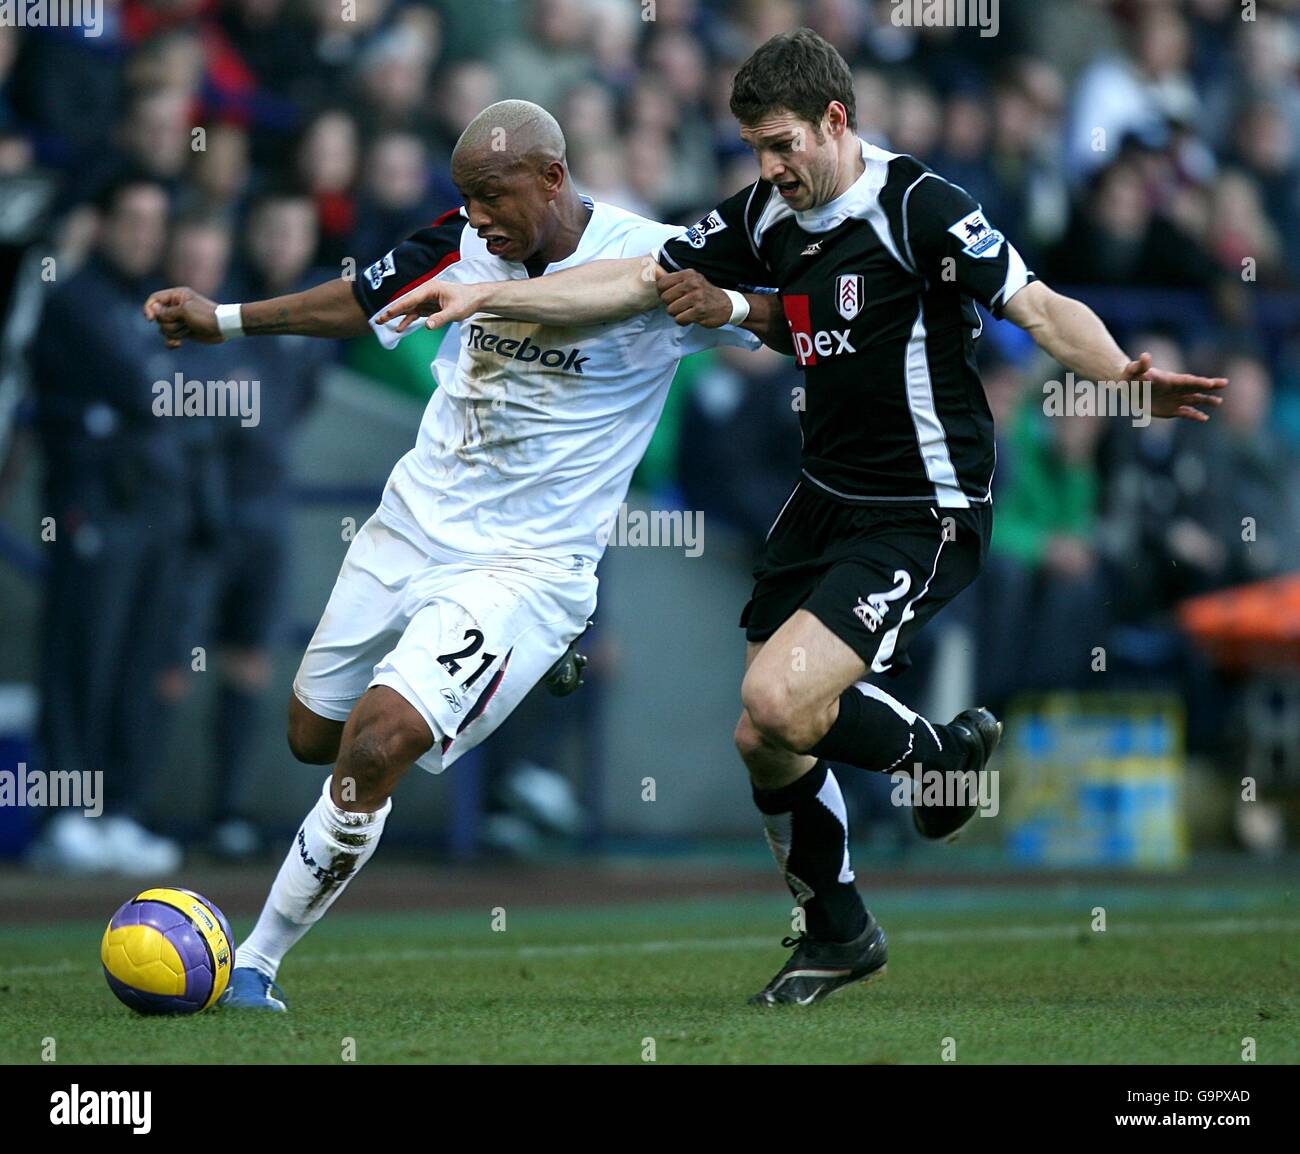 Soccer - FA Barclays Premiership - Bolton Wanderers v Fulham - The Reebok Stadium. Bolton Wanderers' El-Hadji Diouf (l) and Fulham's Moritz Volz (r) battle for the ball Stock Photo